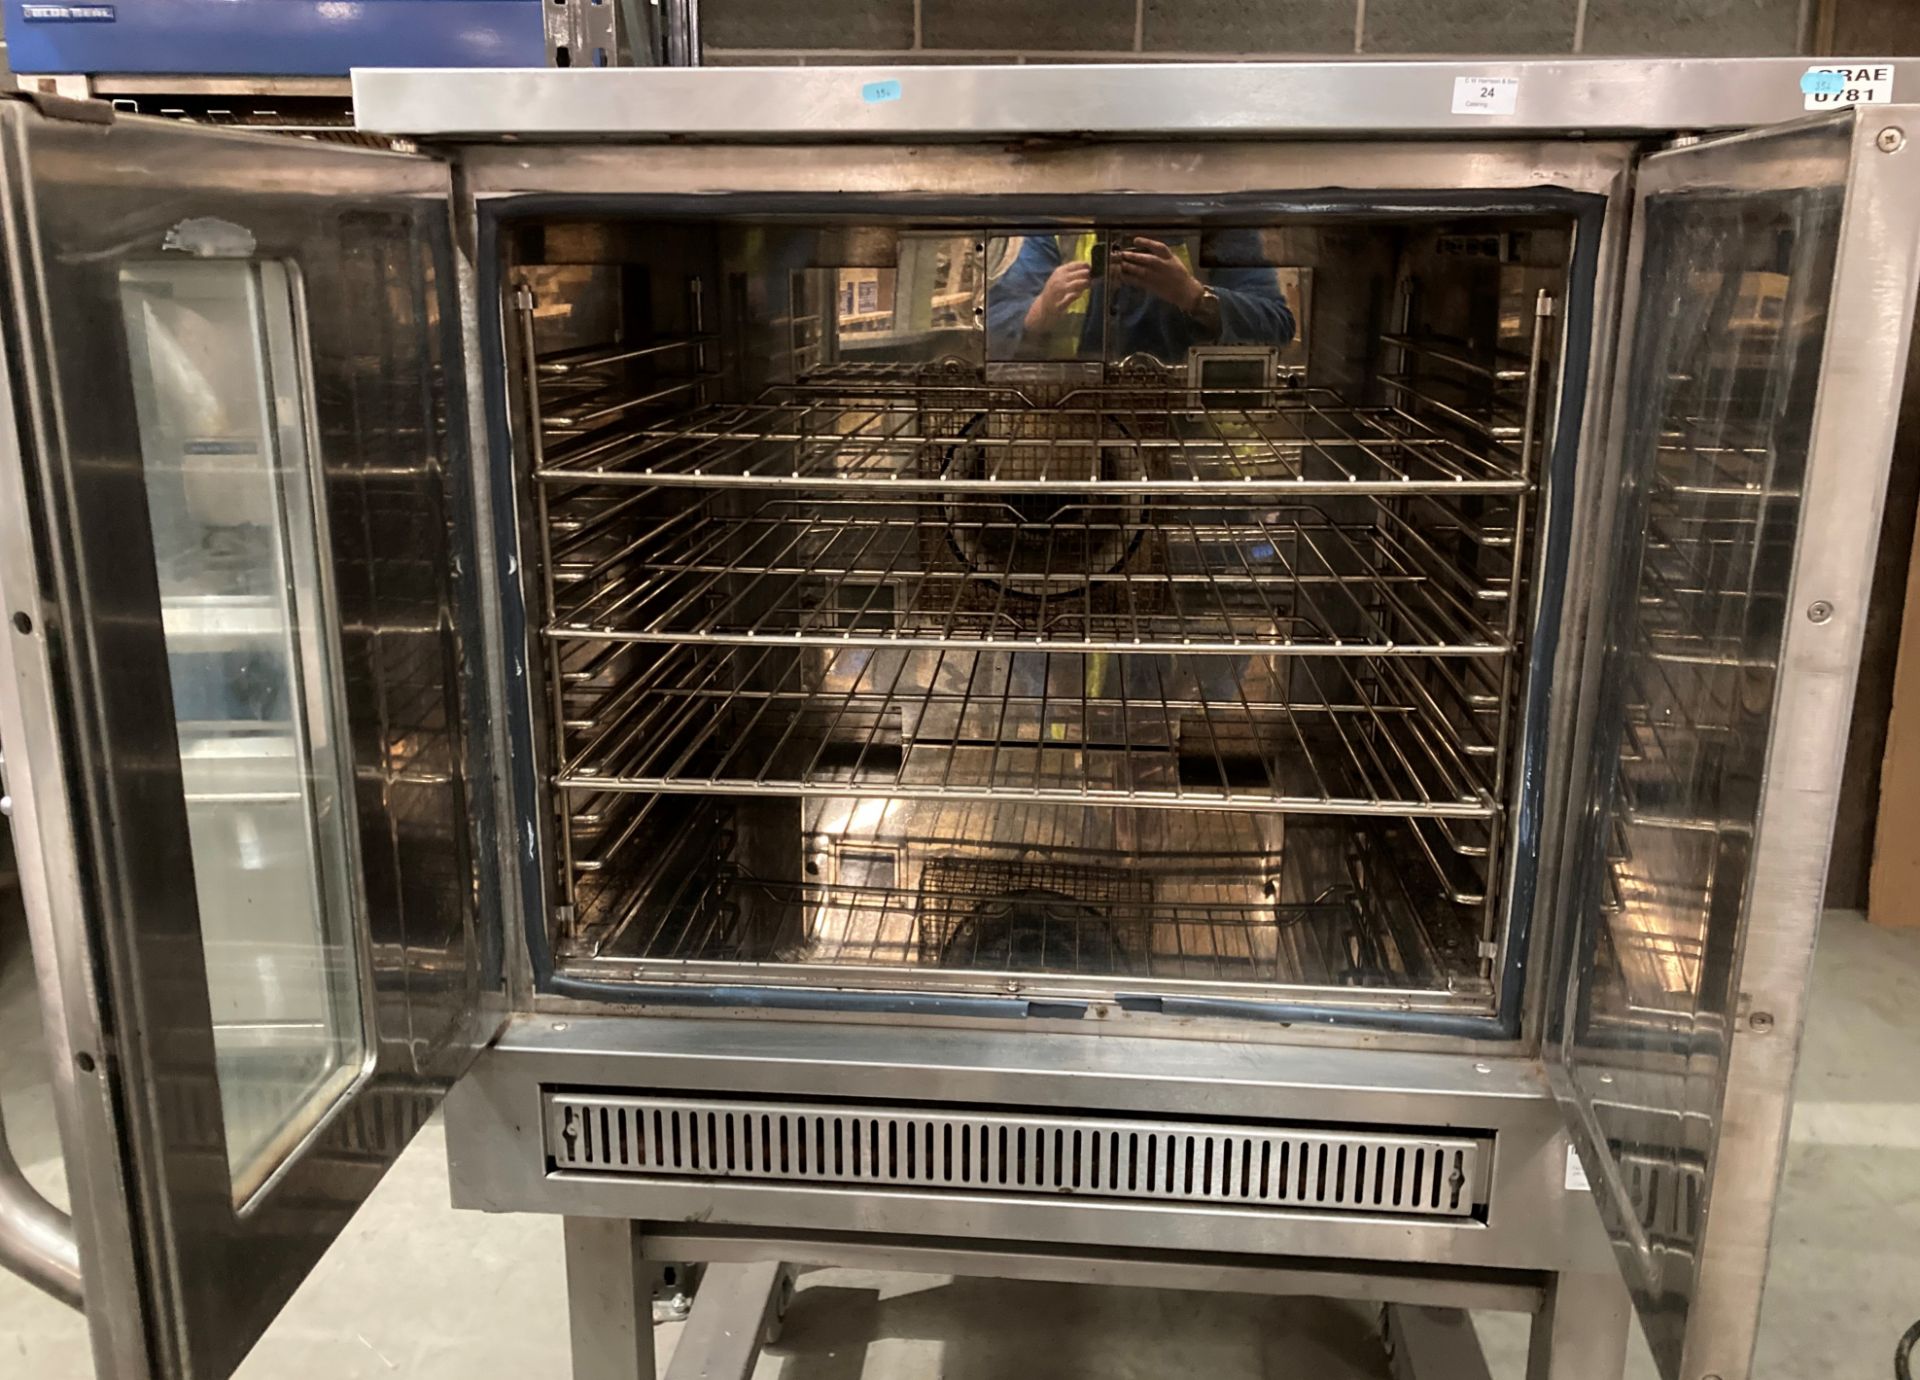 Falcon stainless steel commercial single door gas oven on mobile stand 240v model G/208(saleroom - Image 2 of 5